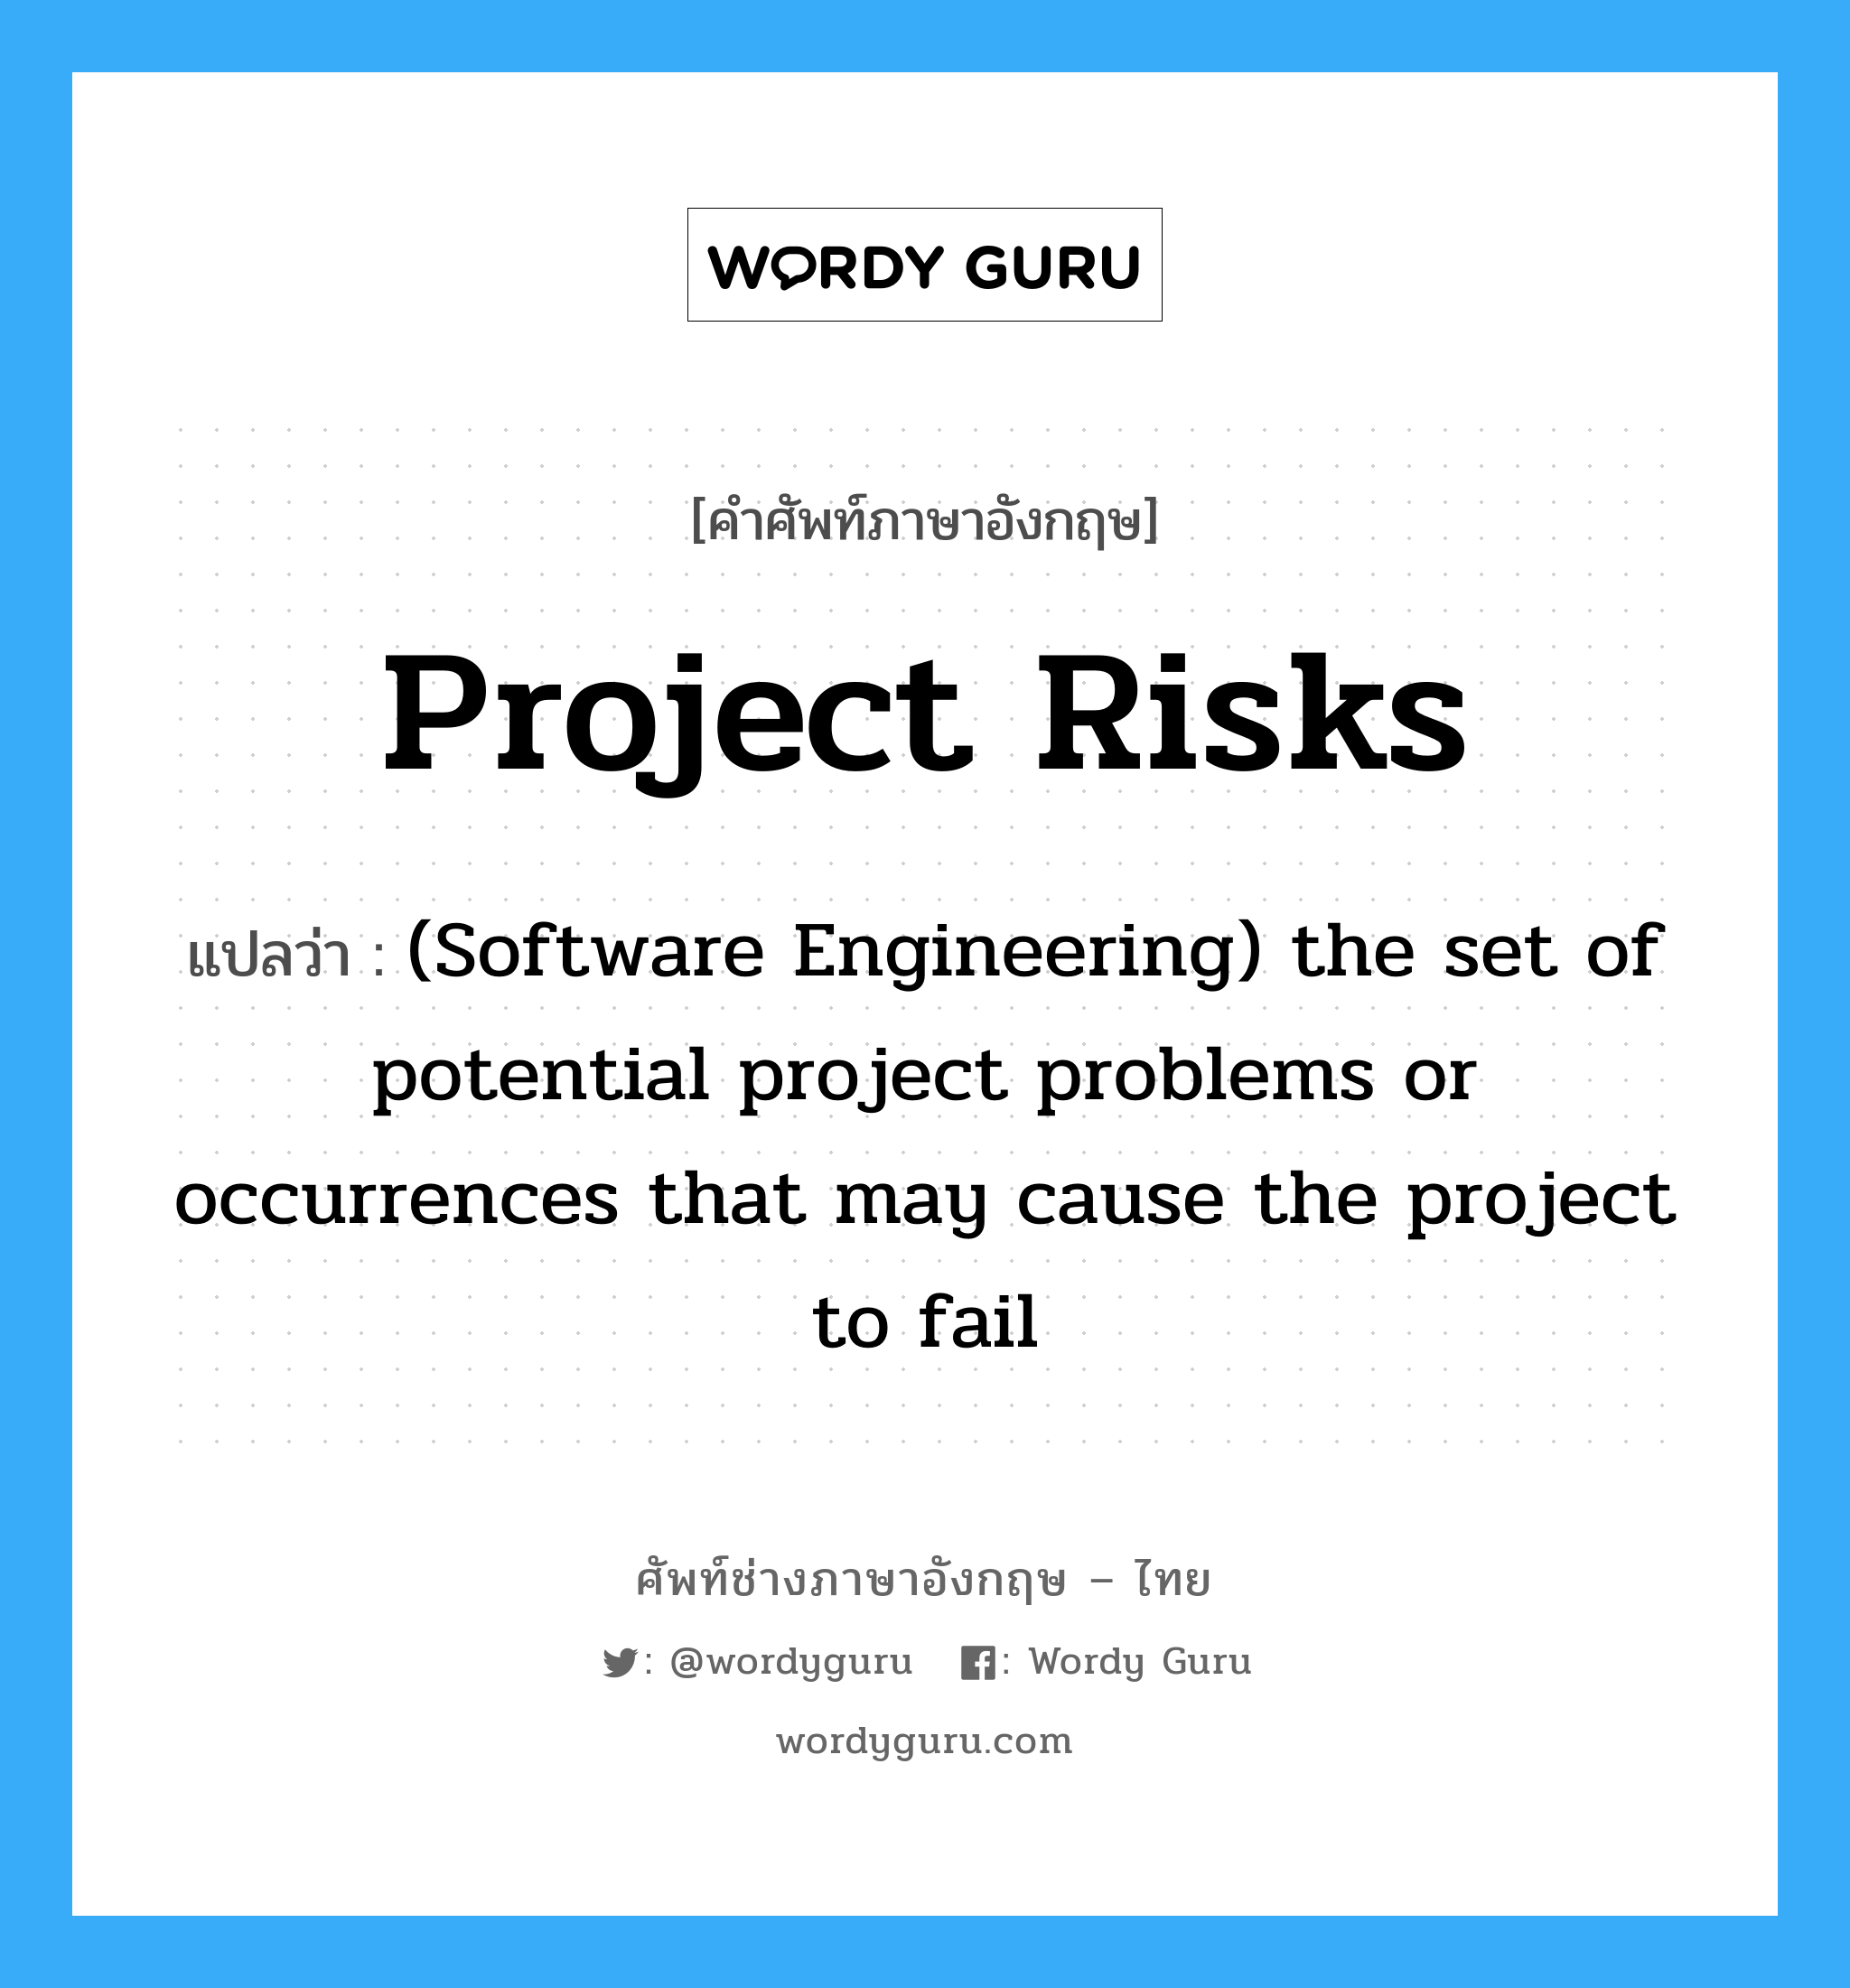 (Software Engineering) the set of potential technical problems or occurrences that may cause the project to fail ภาษาอังกฤษ?, คำศัพท์ช่างภาษาอังกฤษ - ไทย (Software Engineering) the set of potential project problems or occurrences that may cause the project to fail คำศัพท์ภาษาอังกฤษ (Software Engineering) the set of potential project problems or occurrences that may cause the project to fail แปลว่า Project risks